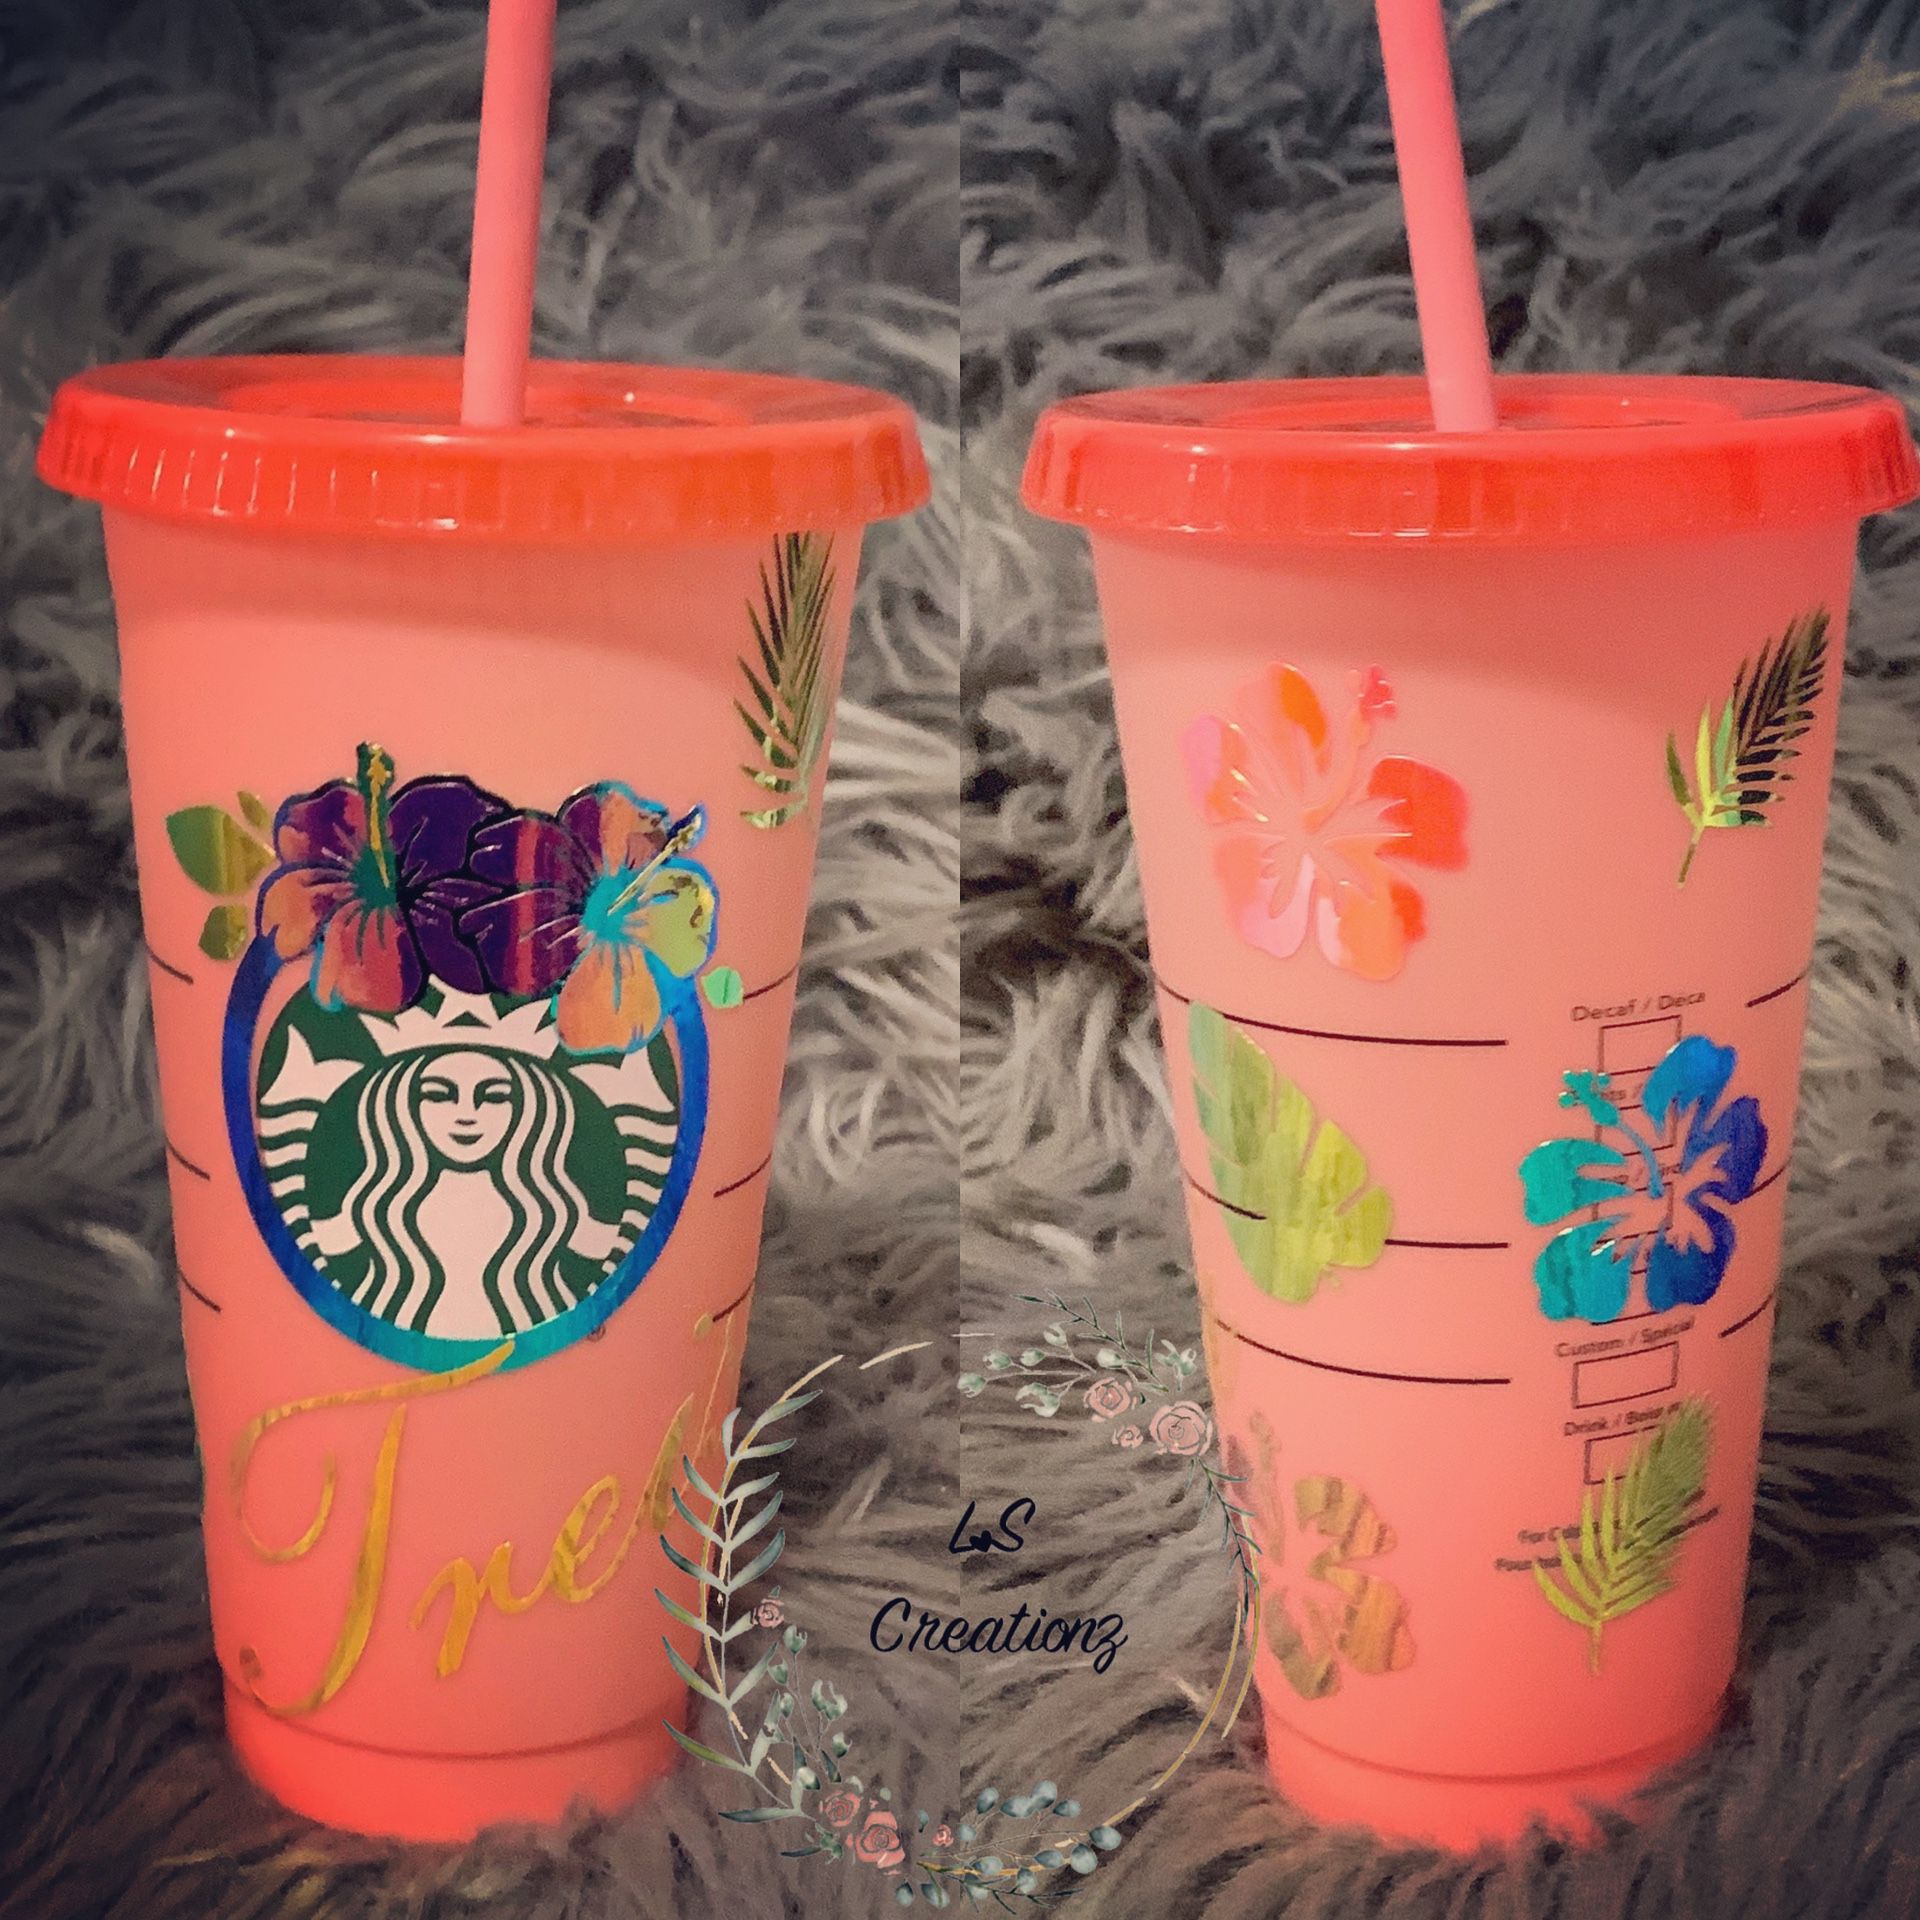 Personalized cups